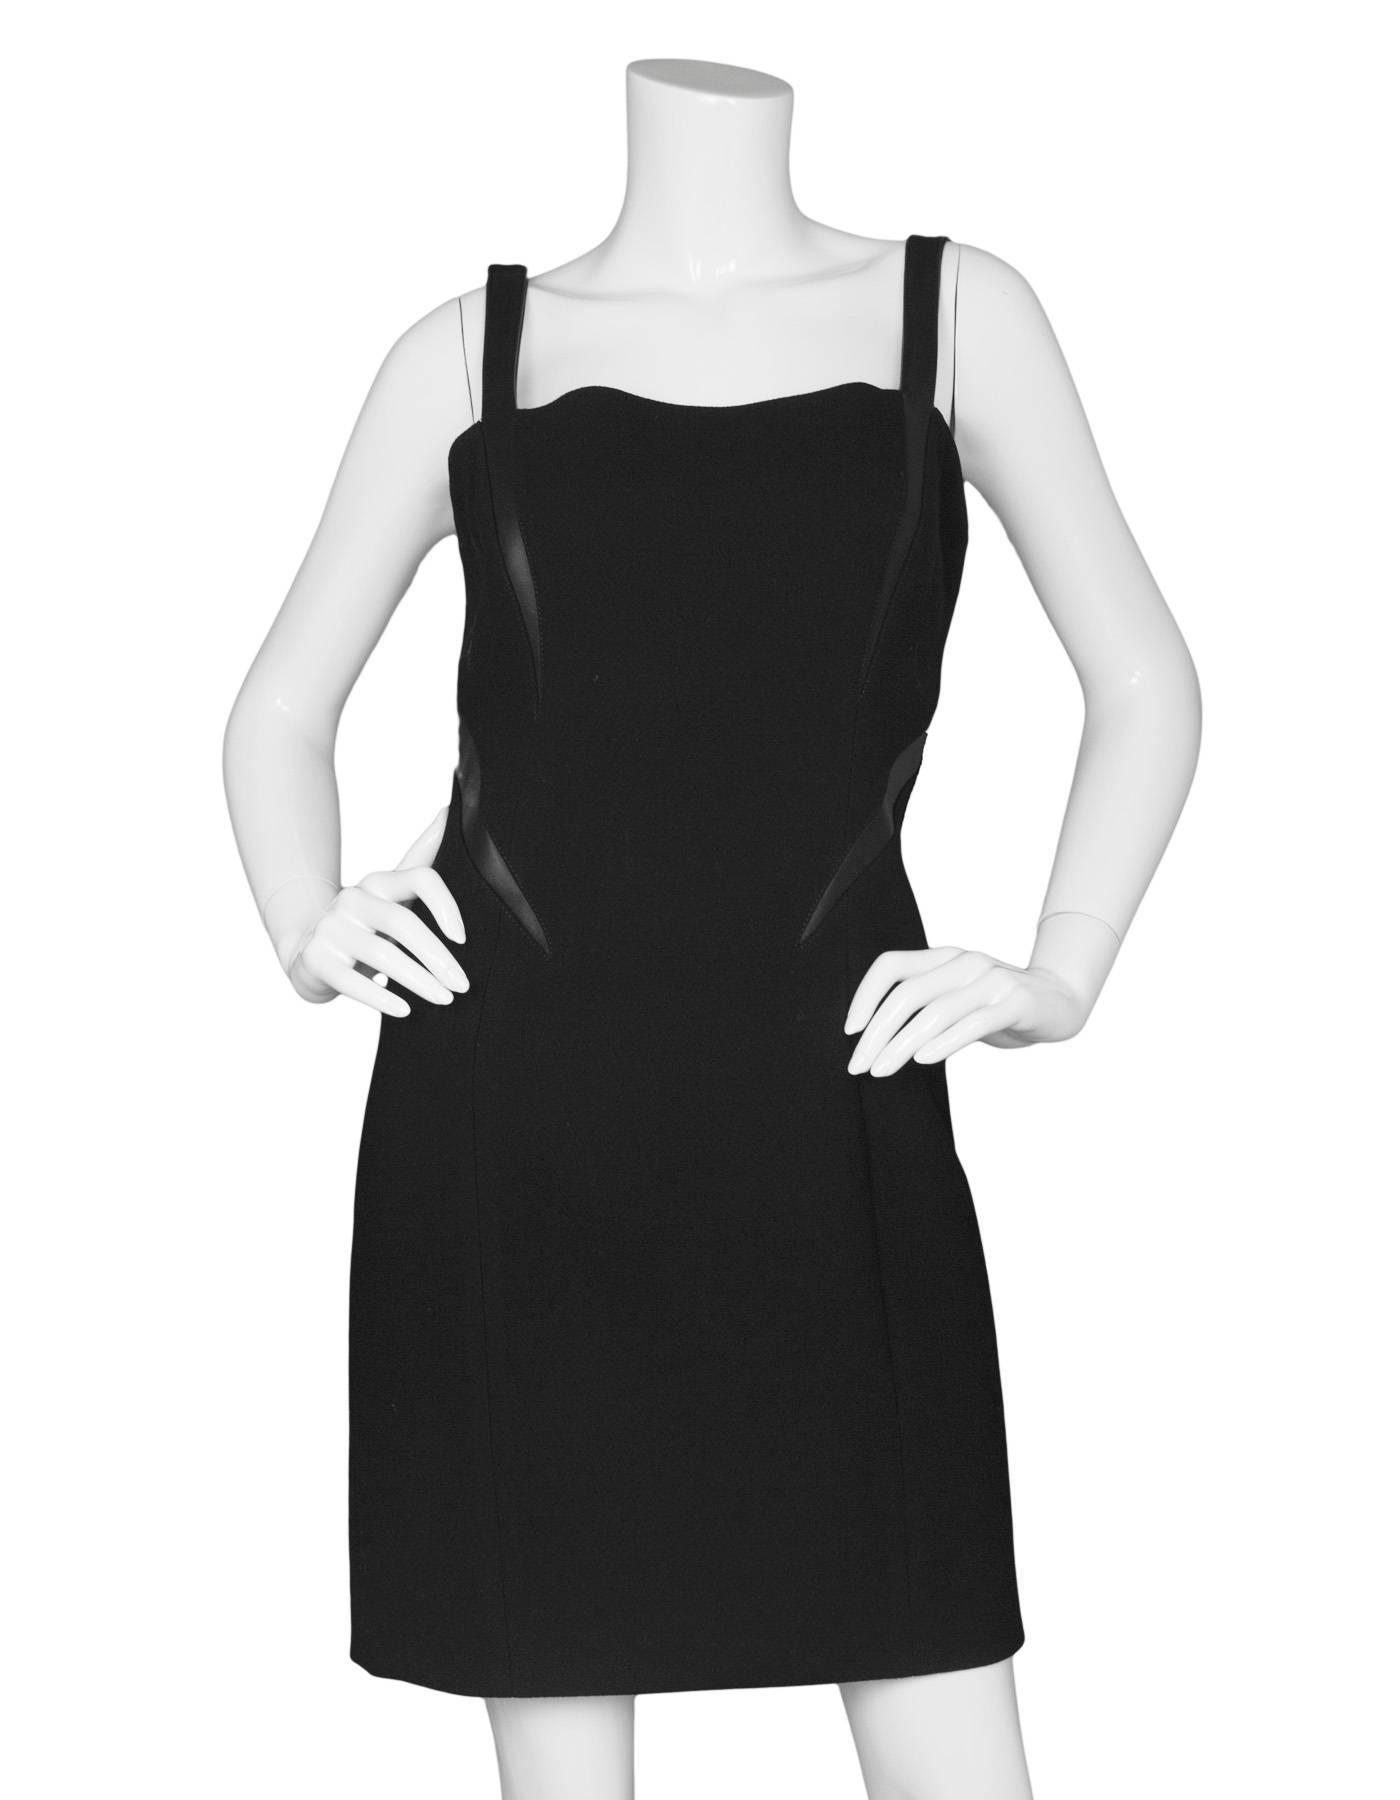 Michael Kors Black Shift Dress
Features leather trim and shoulder straps

Made In: Italy
Color: Black 
Composition: Not given- believed to be a wool-blend, trim- 100% leather
Lining: Black, nylon-blend
Closure/Opening: Back center zip up
Exterior